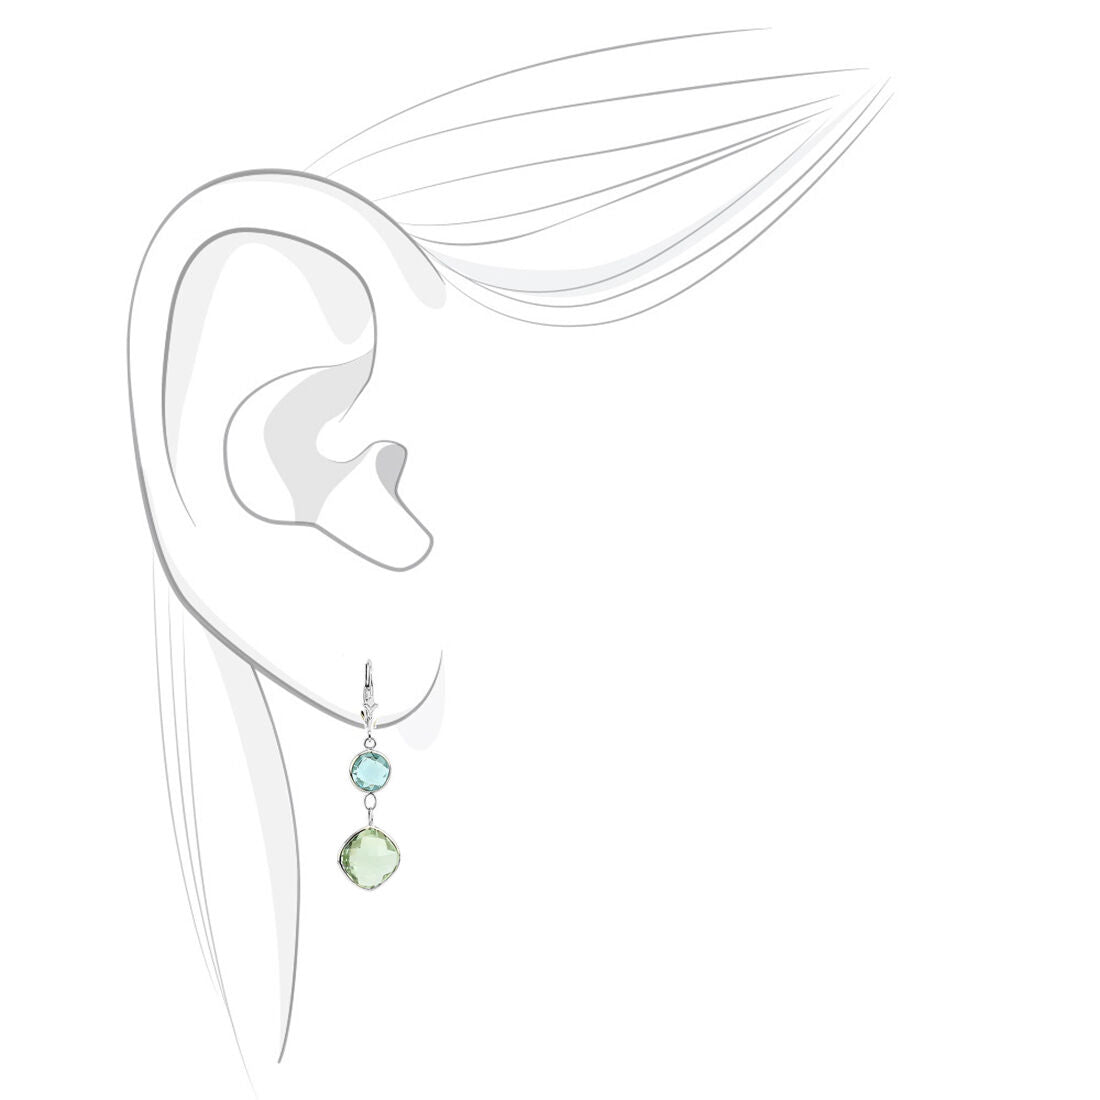 14K White Gold Gemstone Earrings With Green Amethyst And Blue Topaz